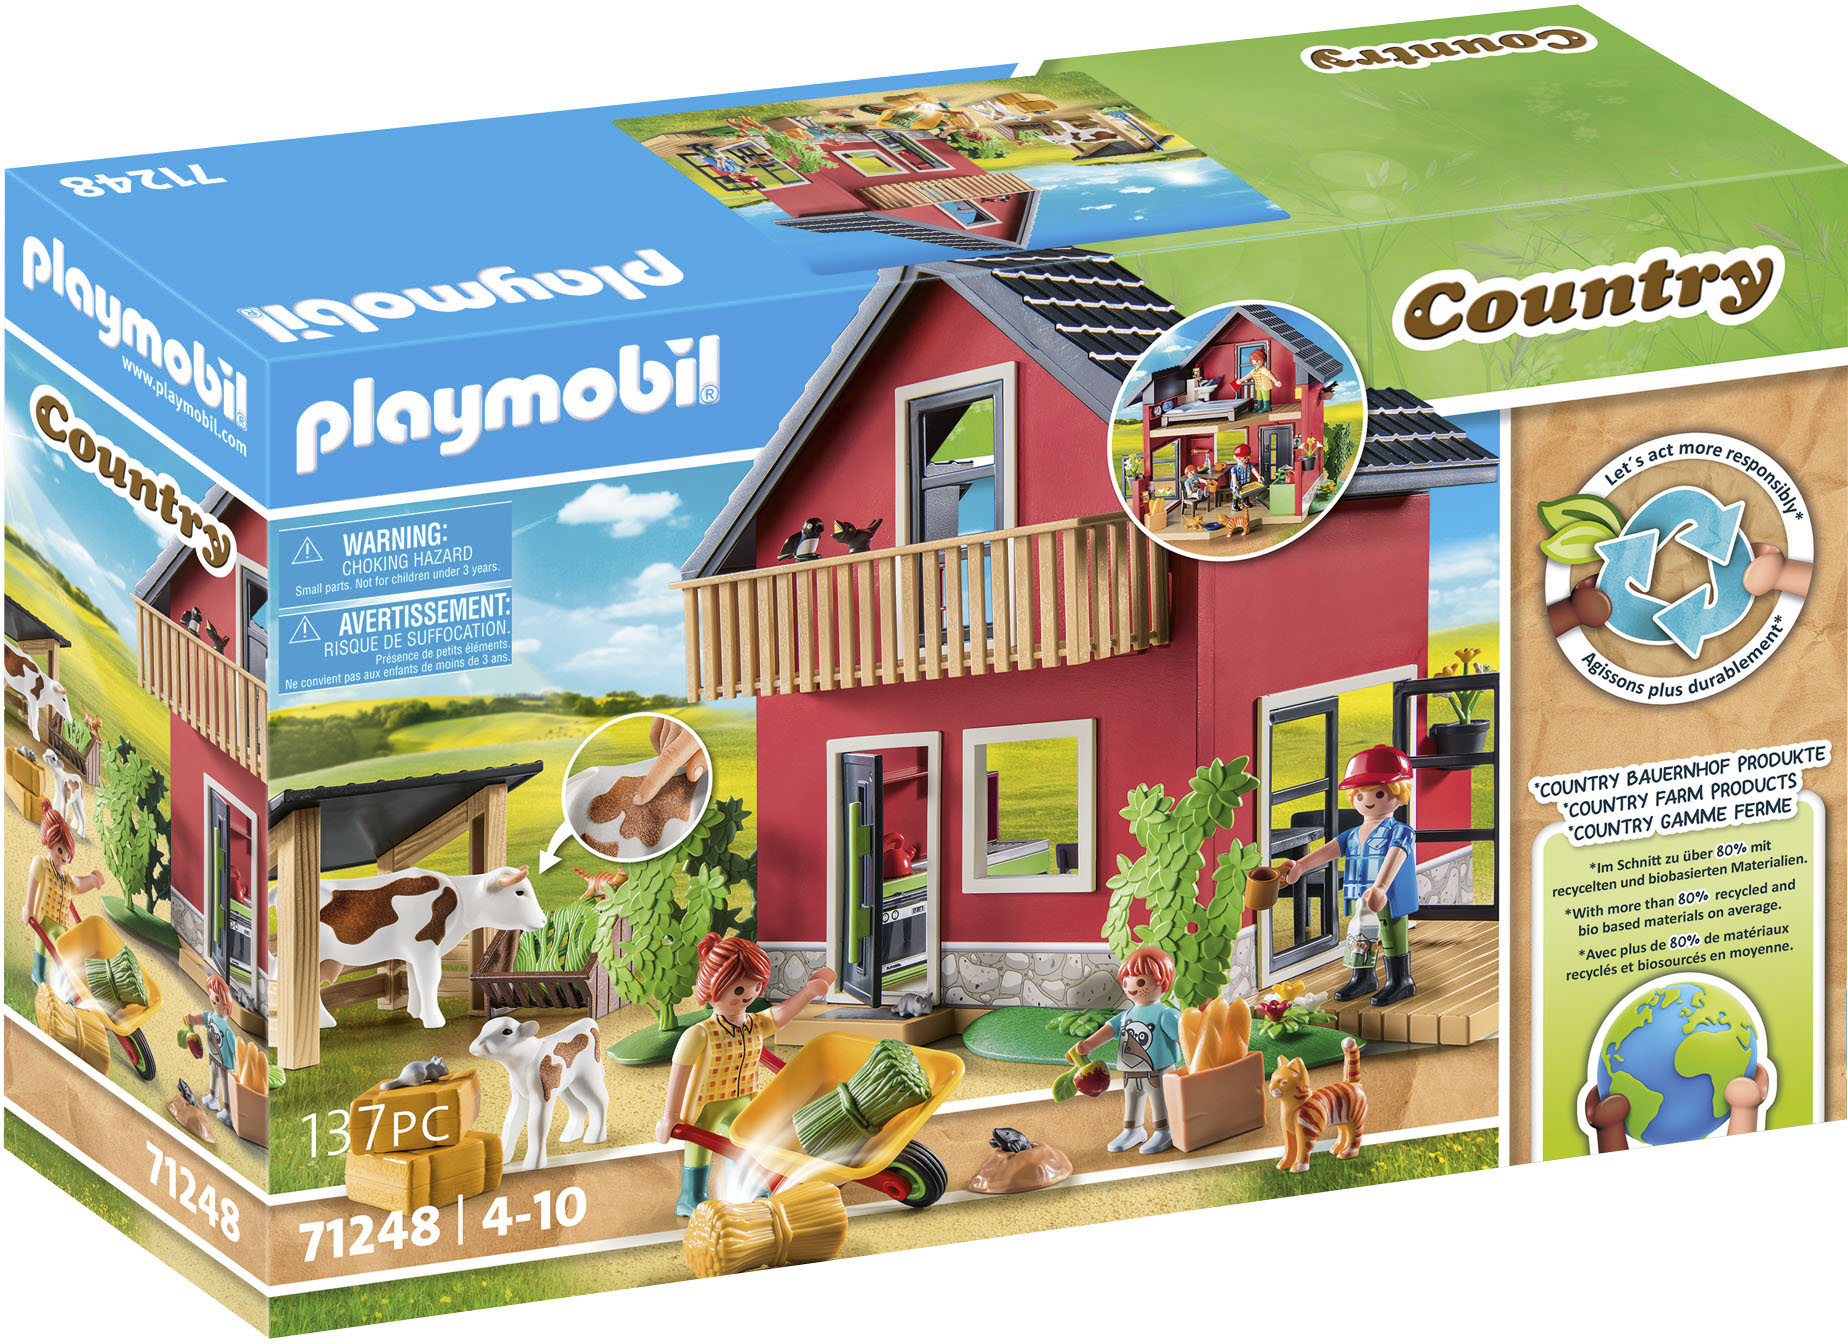 Playmobil® Konstruktions-Spielset »Bauernhaus (71248), Country«, teilweise aus recyceltem Material; Made in Germany von Playmobil®